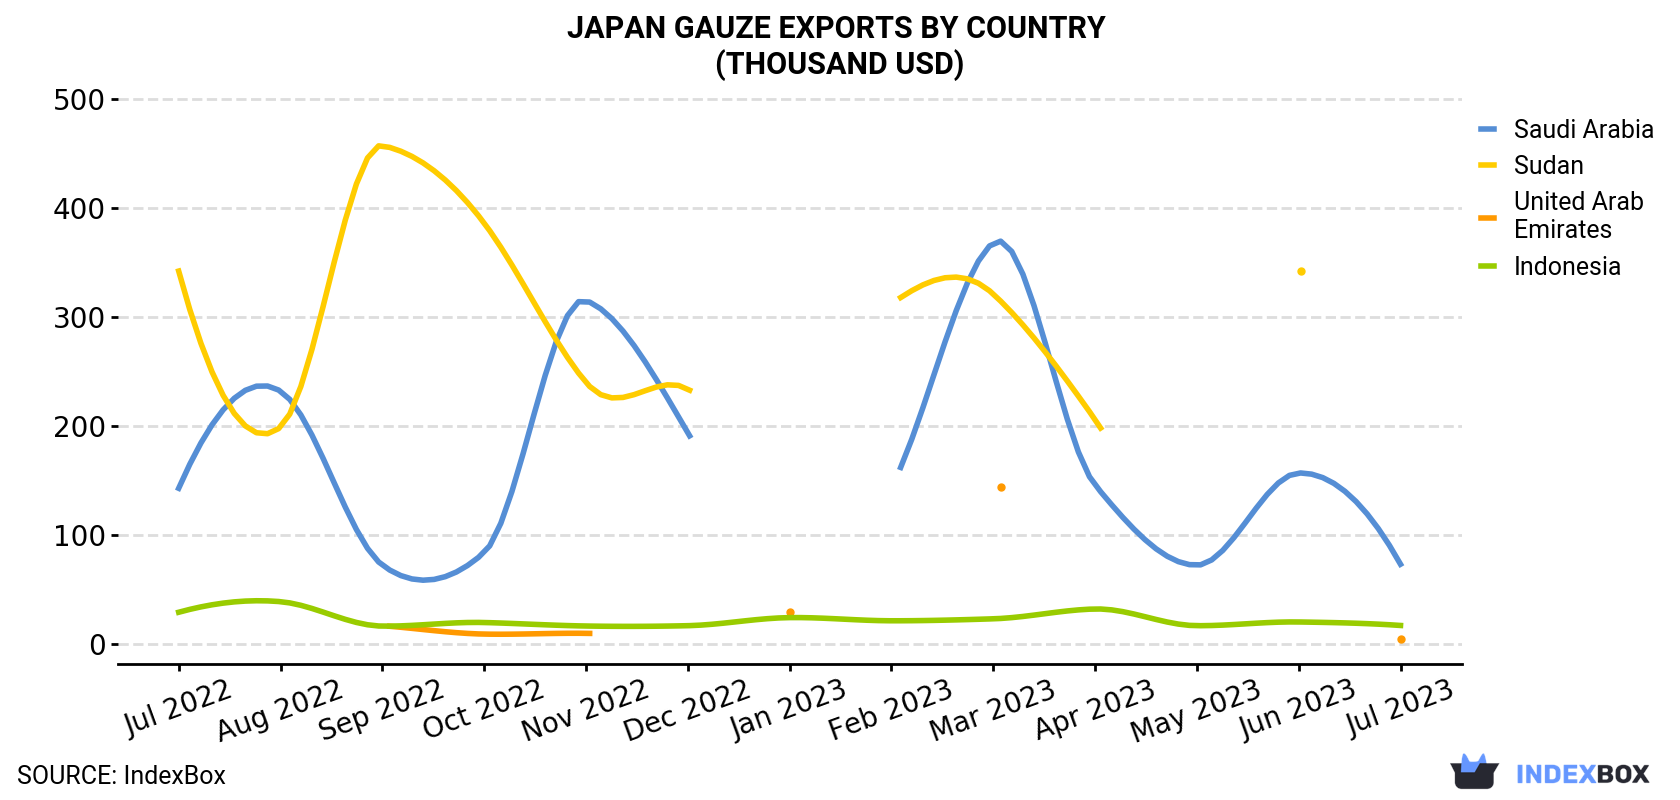 Japan Gauze Exports By Country (Thousand USD)